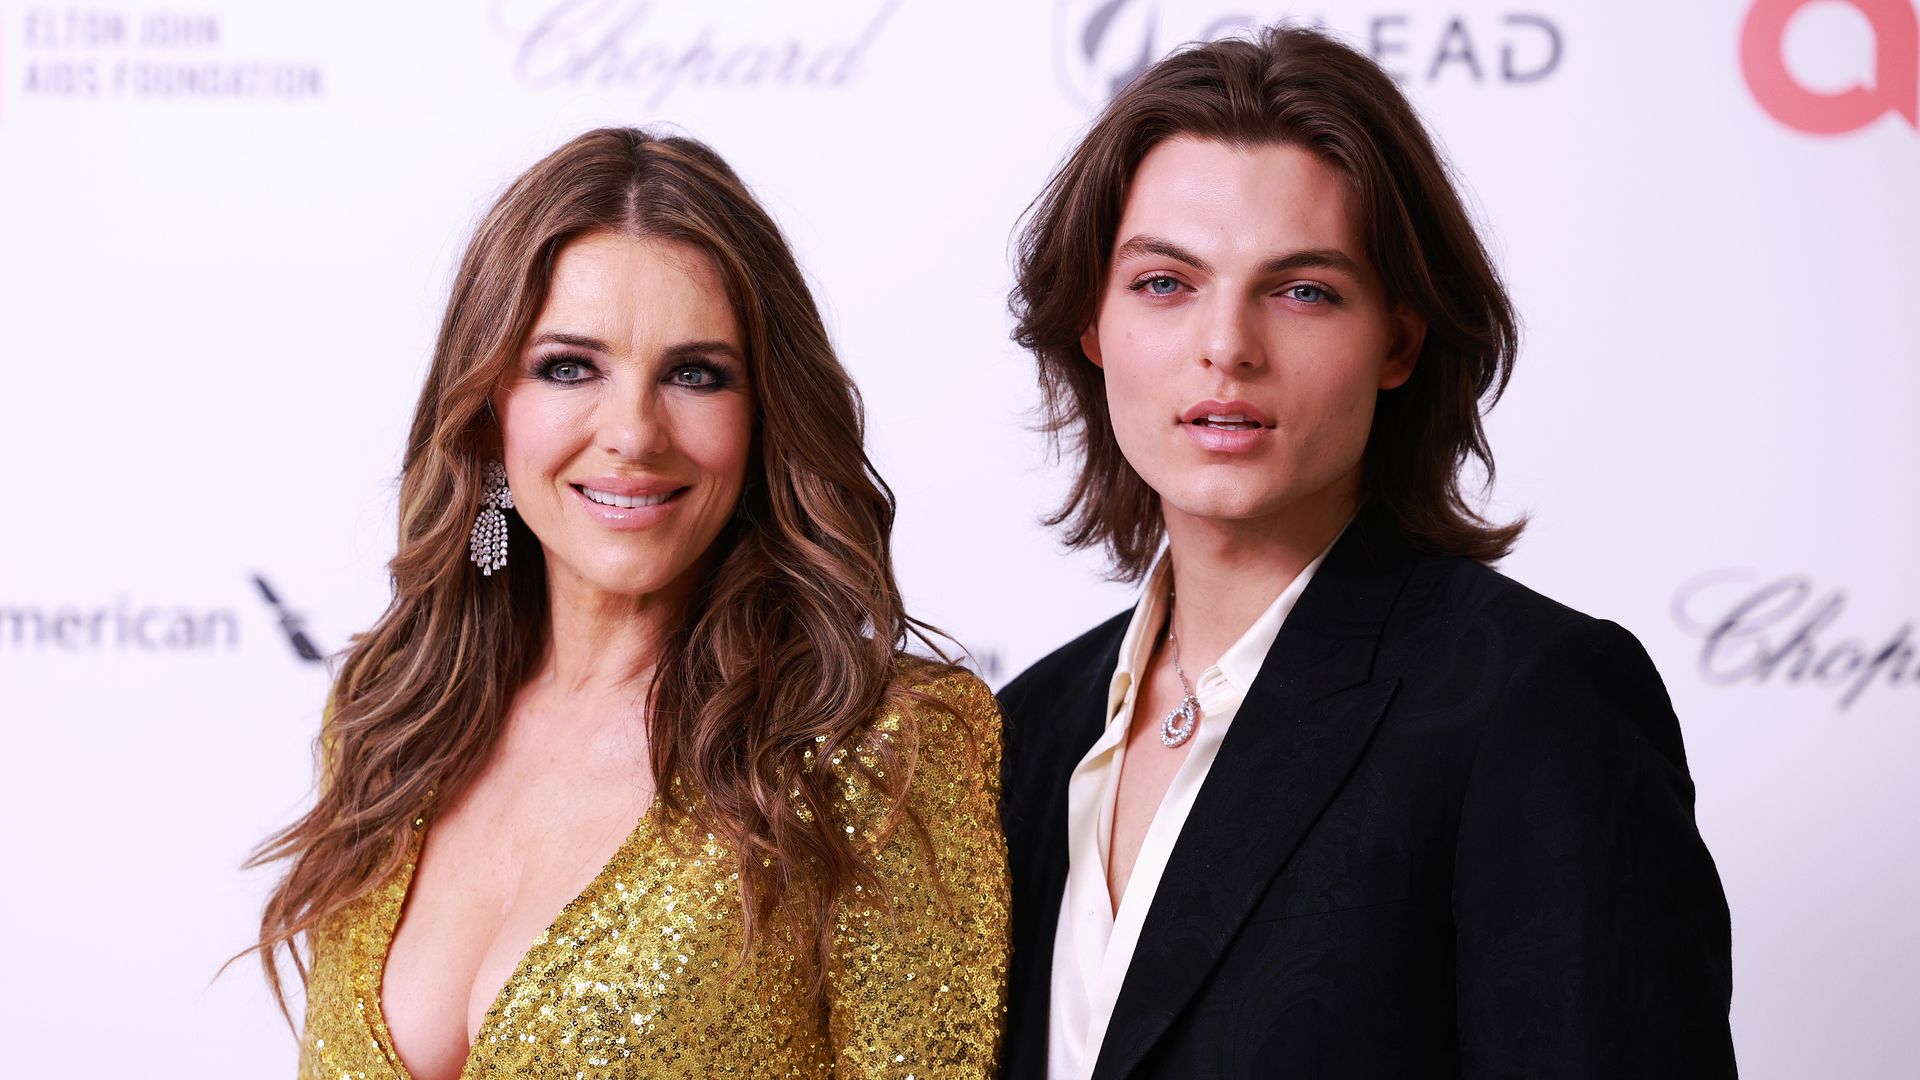 Elizabeth Hurley and Damian Hurley at the 32nd Annual Elton John AIDS Foundation Academy Awards Viewing Party held at The City of West Hollywood Park on March 10, 2024 in West Hollywood, California